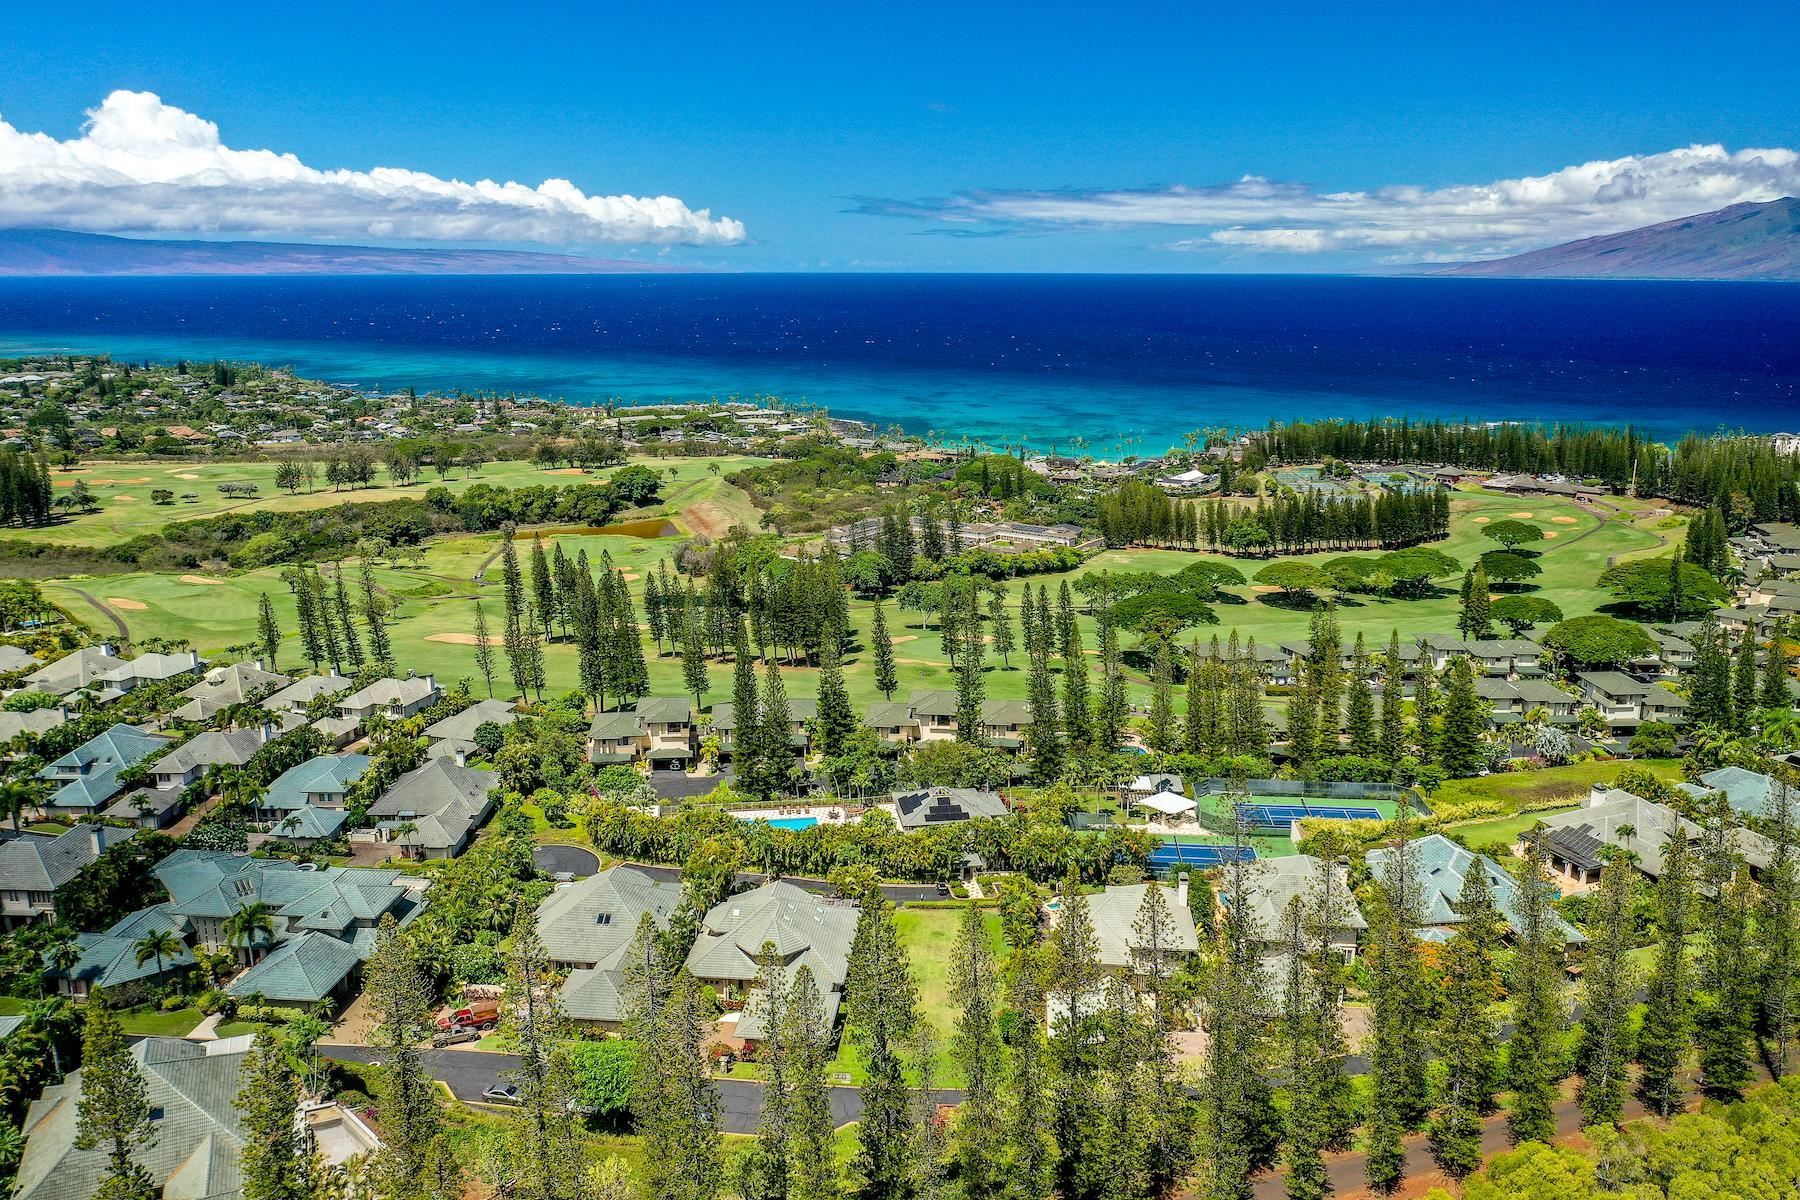 Pineapple Hill at Kapalua Owners' Association cover